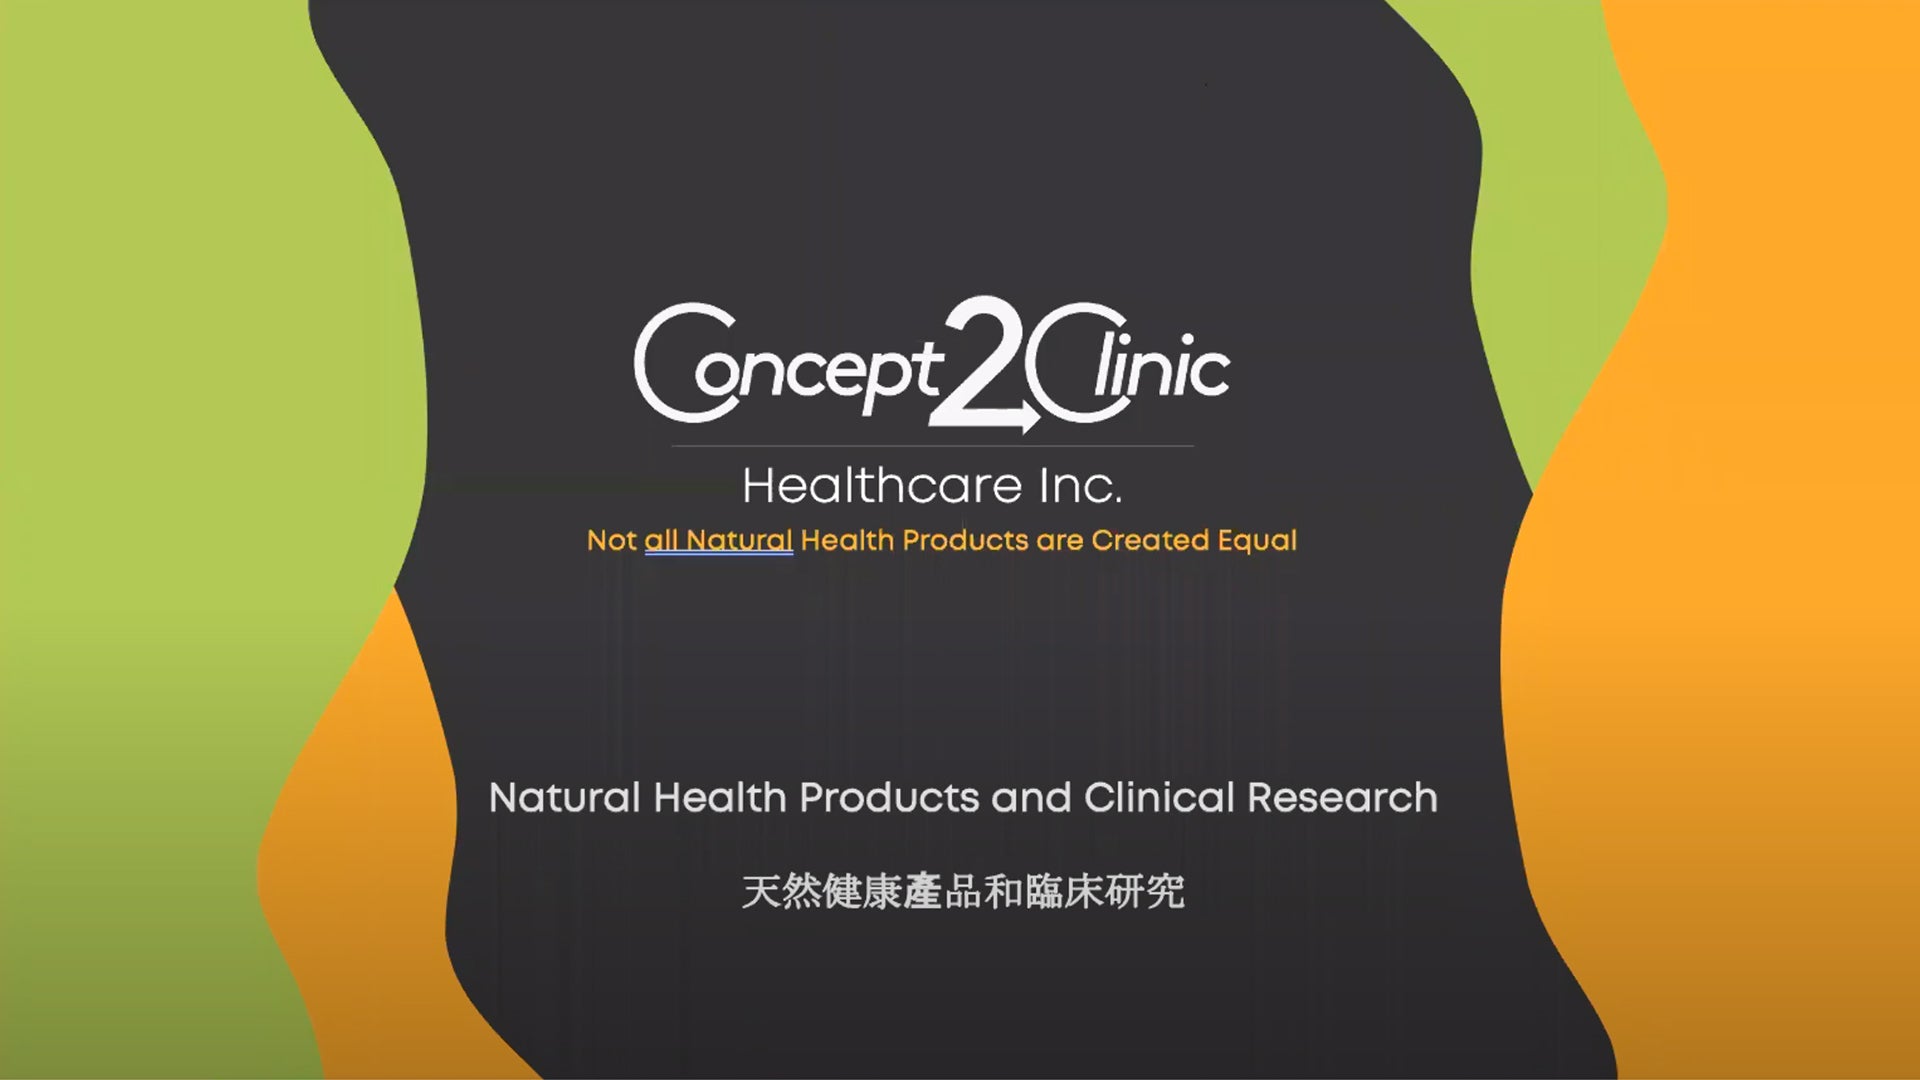 Webinar 02: How to assess Natural Health Product Quality?